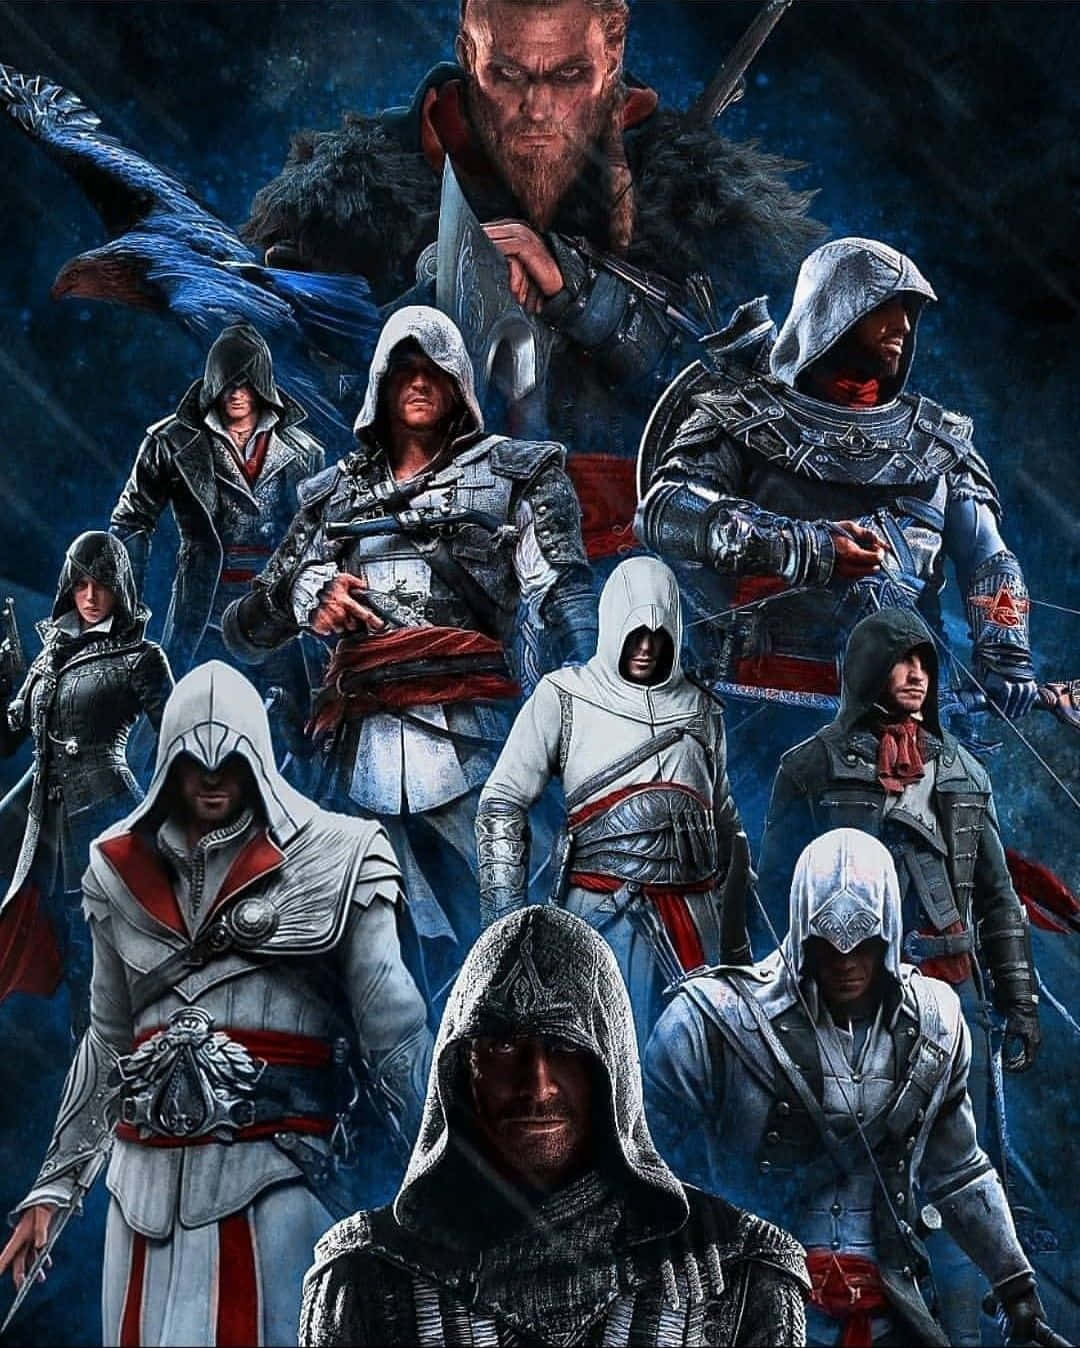 Iconic Assassin's Creed Characters in an Epic Pose Wallpaper